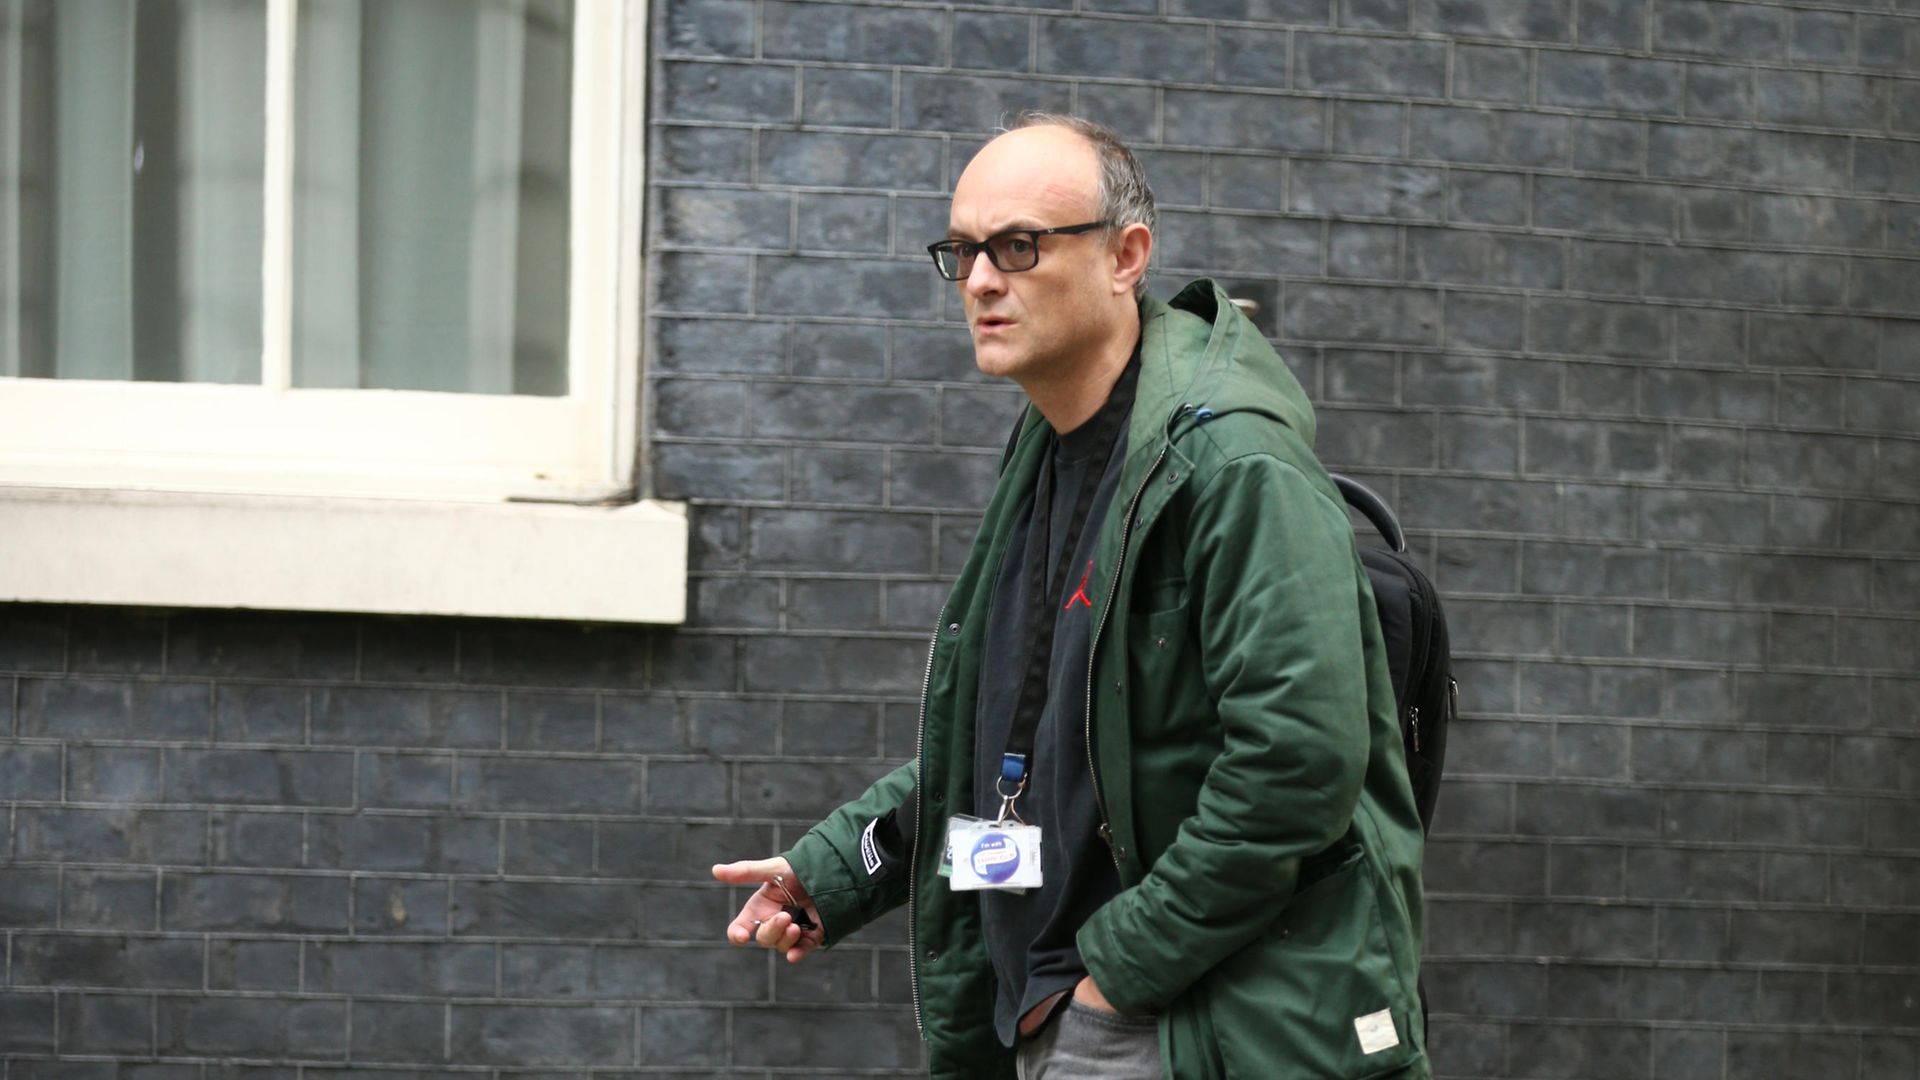 Senior aide to Prime Minister Boris Johnson, Dominic Cummings, arrives at 10 Downing Street - Credit: PA